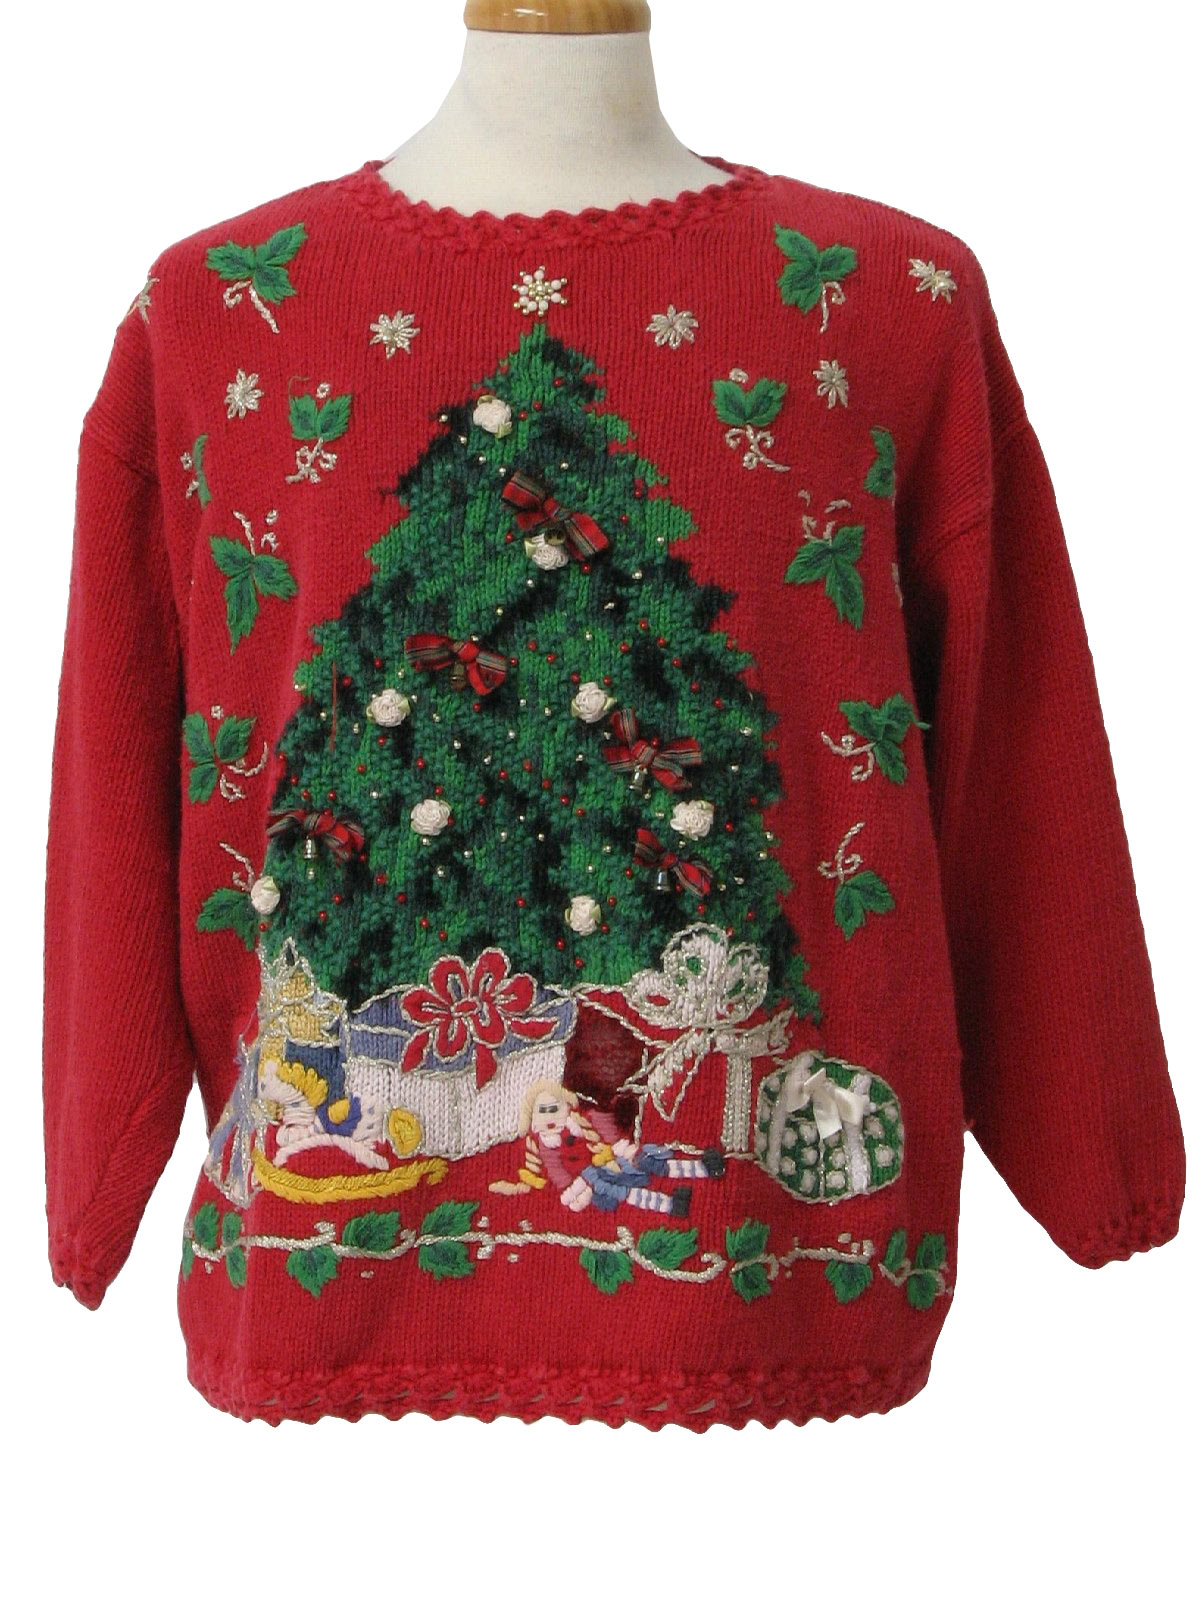 Ugly Christmas Sweater: -Jacque and KoKo- Unisex red ramie and cotton ...